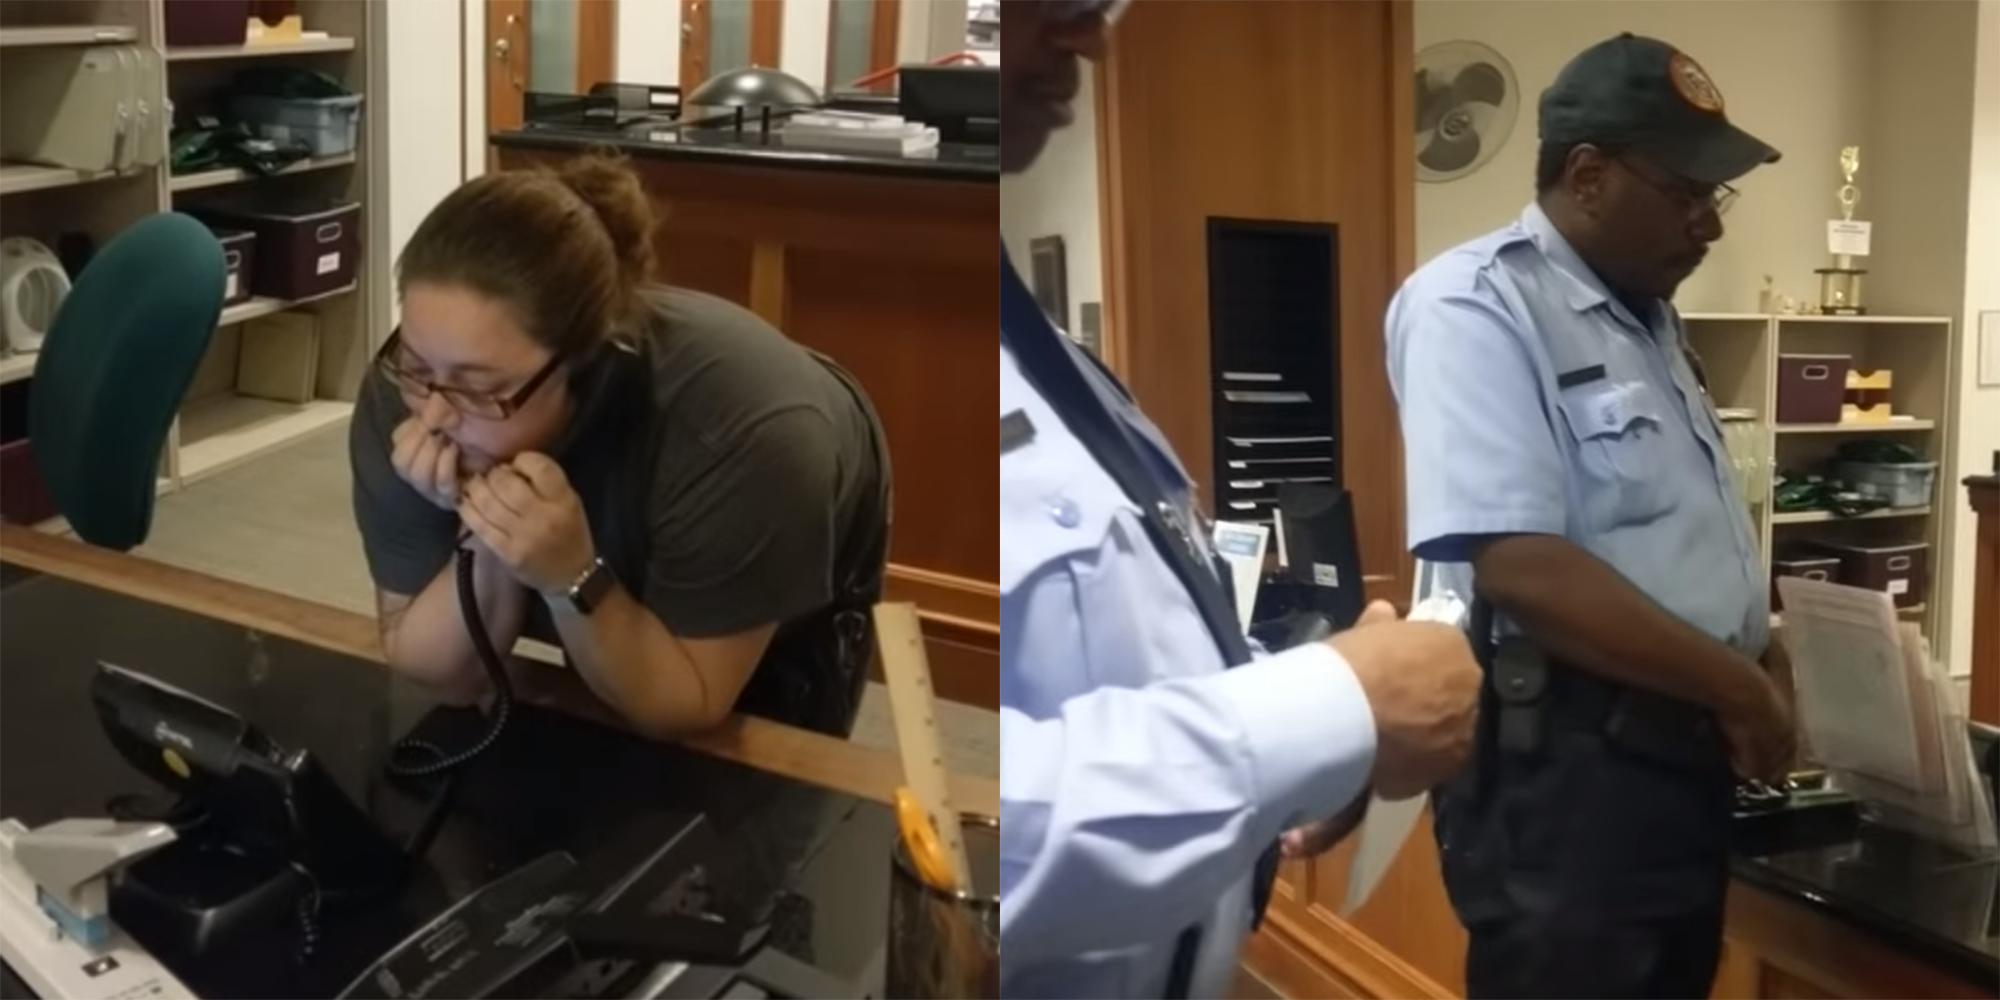 White Woman Calls The Police On A Black Man For Asking To Use A Library